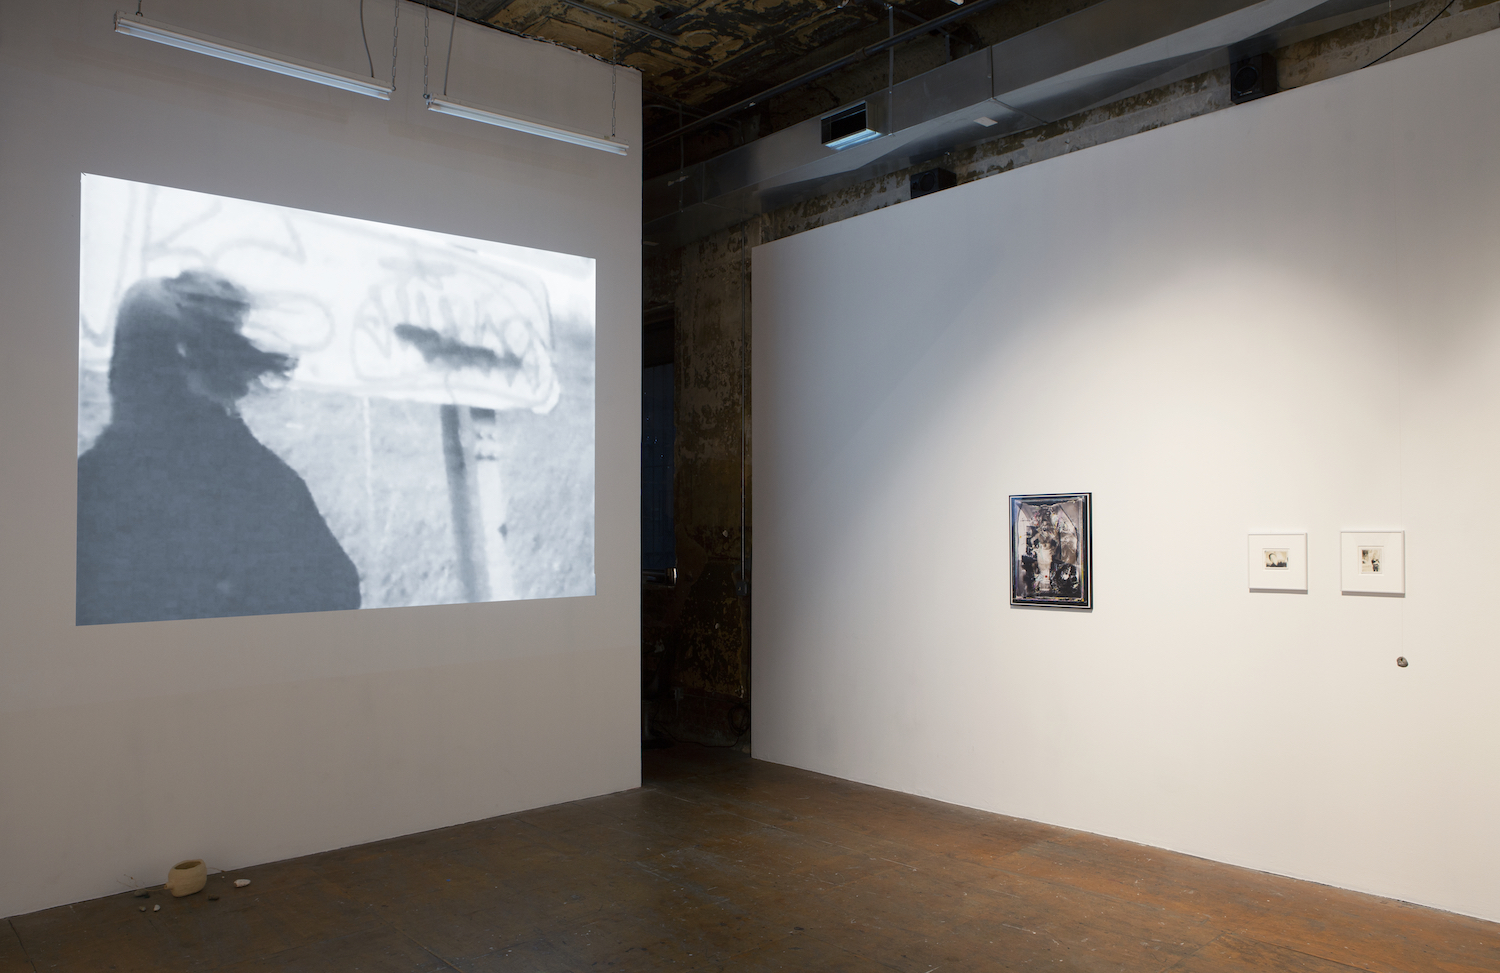 *Altered After*, installation view with Leslie Kaliades and Gail Thacker